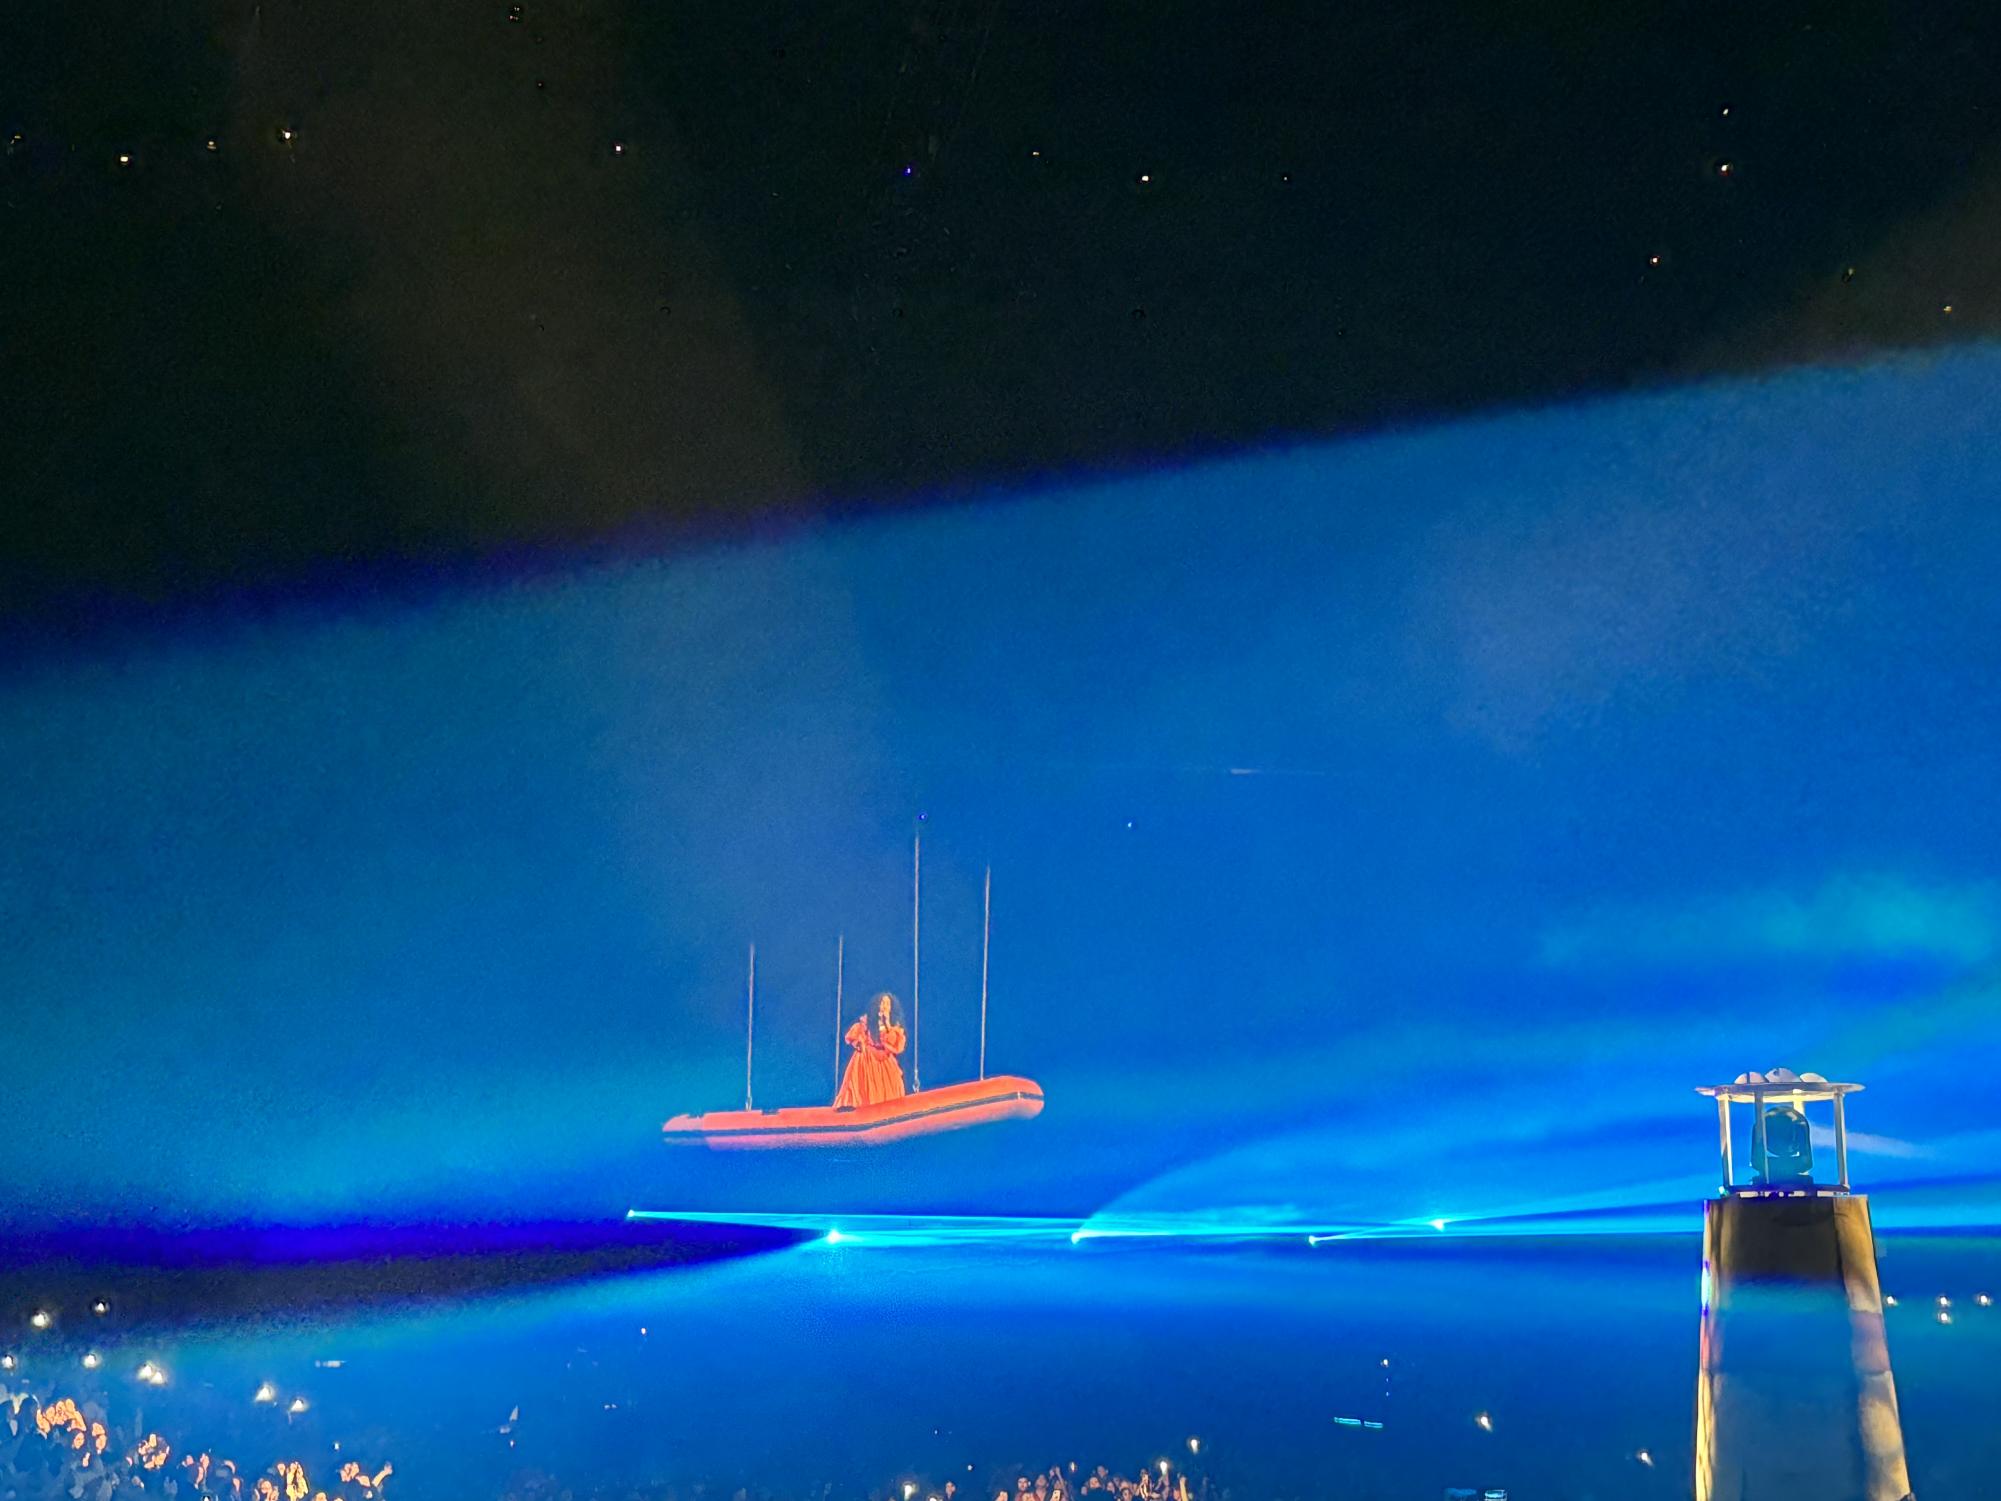 The iconic shot of SZA floating on a lifeboat over the audience appearing to show that the audience is under the water.